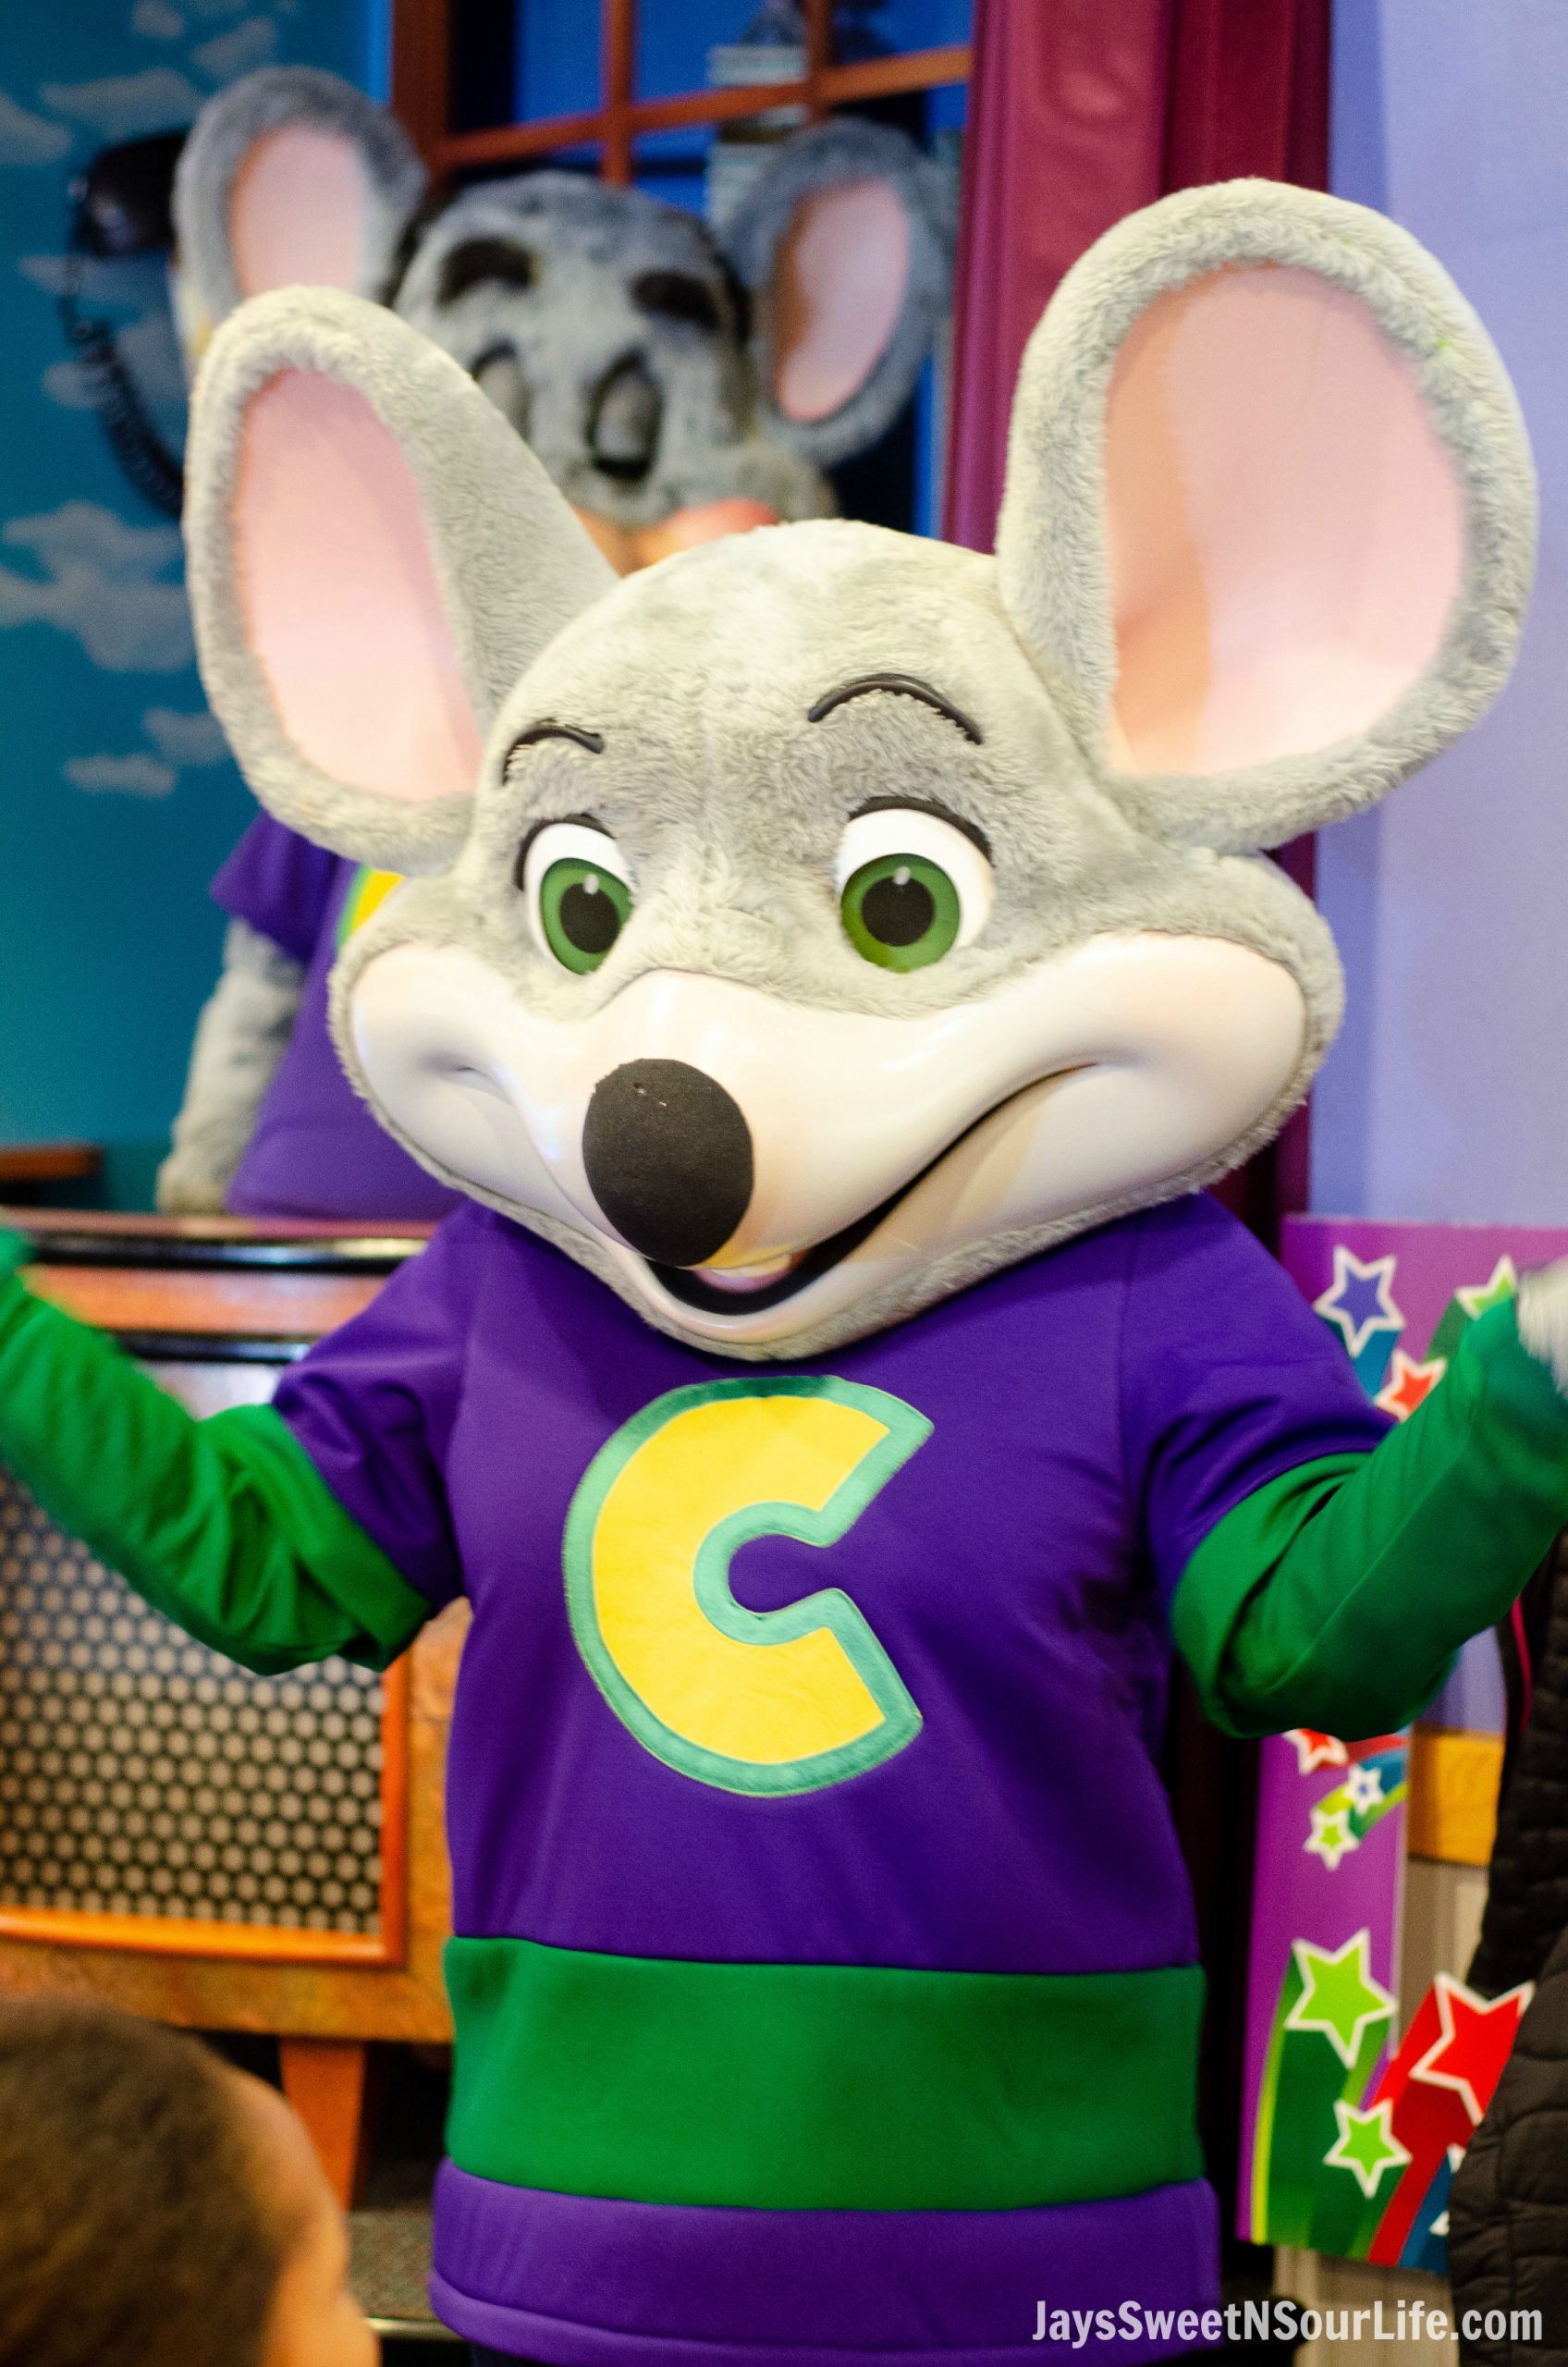 Chuck E Cheese Fire Wallpapers Hd Oursongfortoday Images And Photos